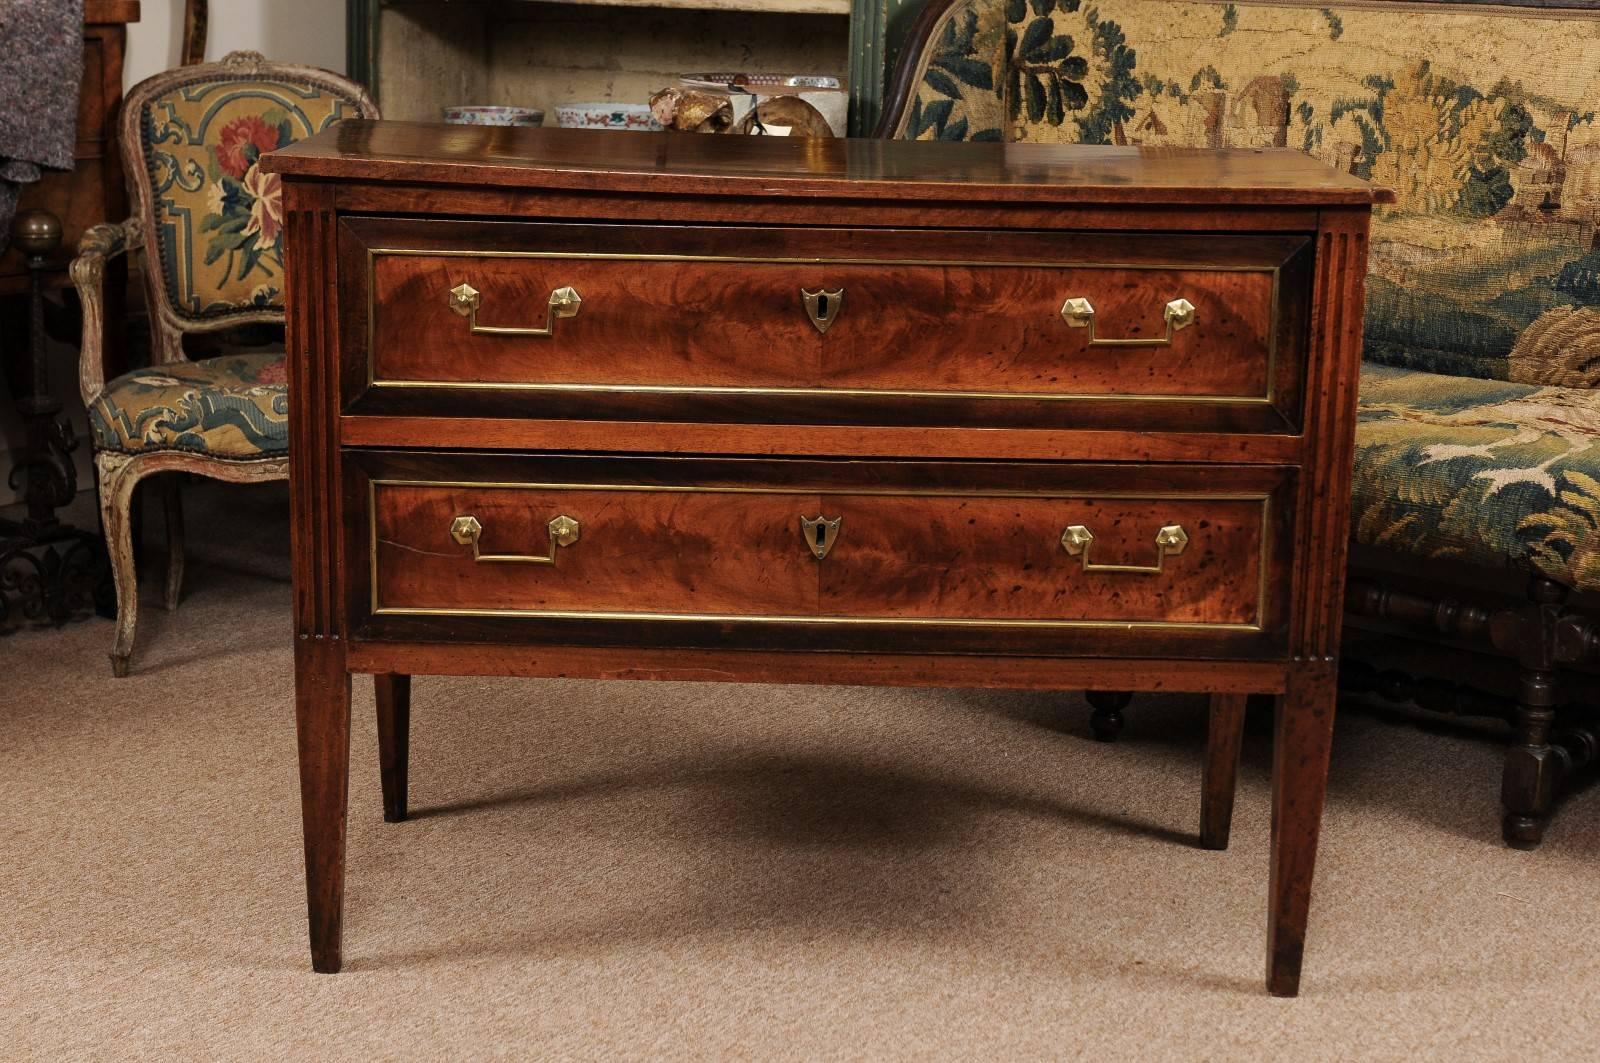 The XVI French commode in walnut with rich patina, carved fluted detail, two drawers with brass pulls and trim. All resting on tapered legs.